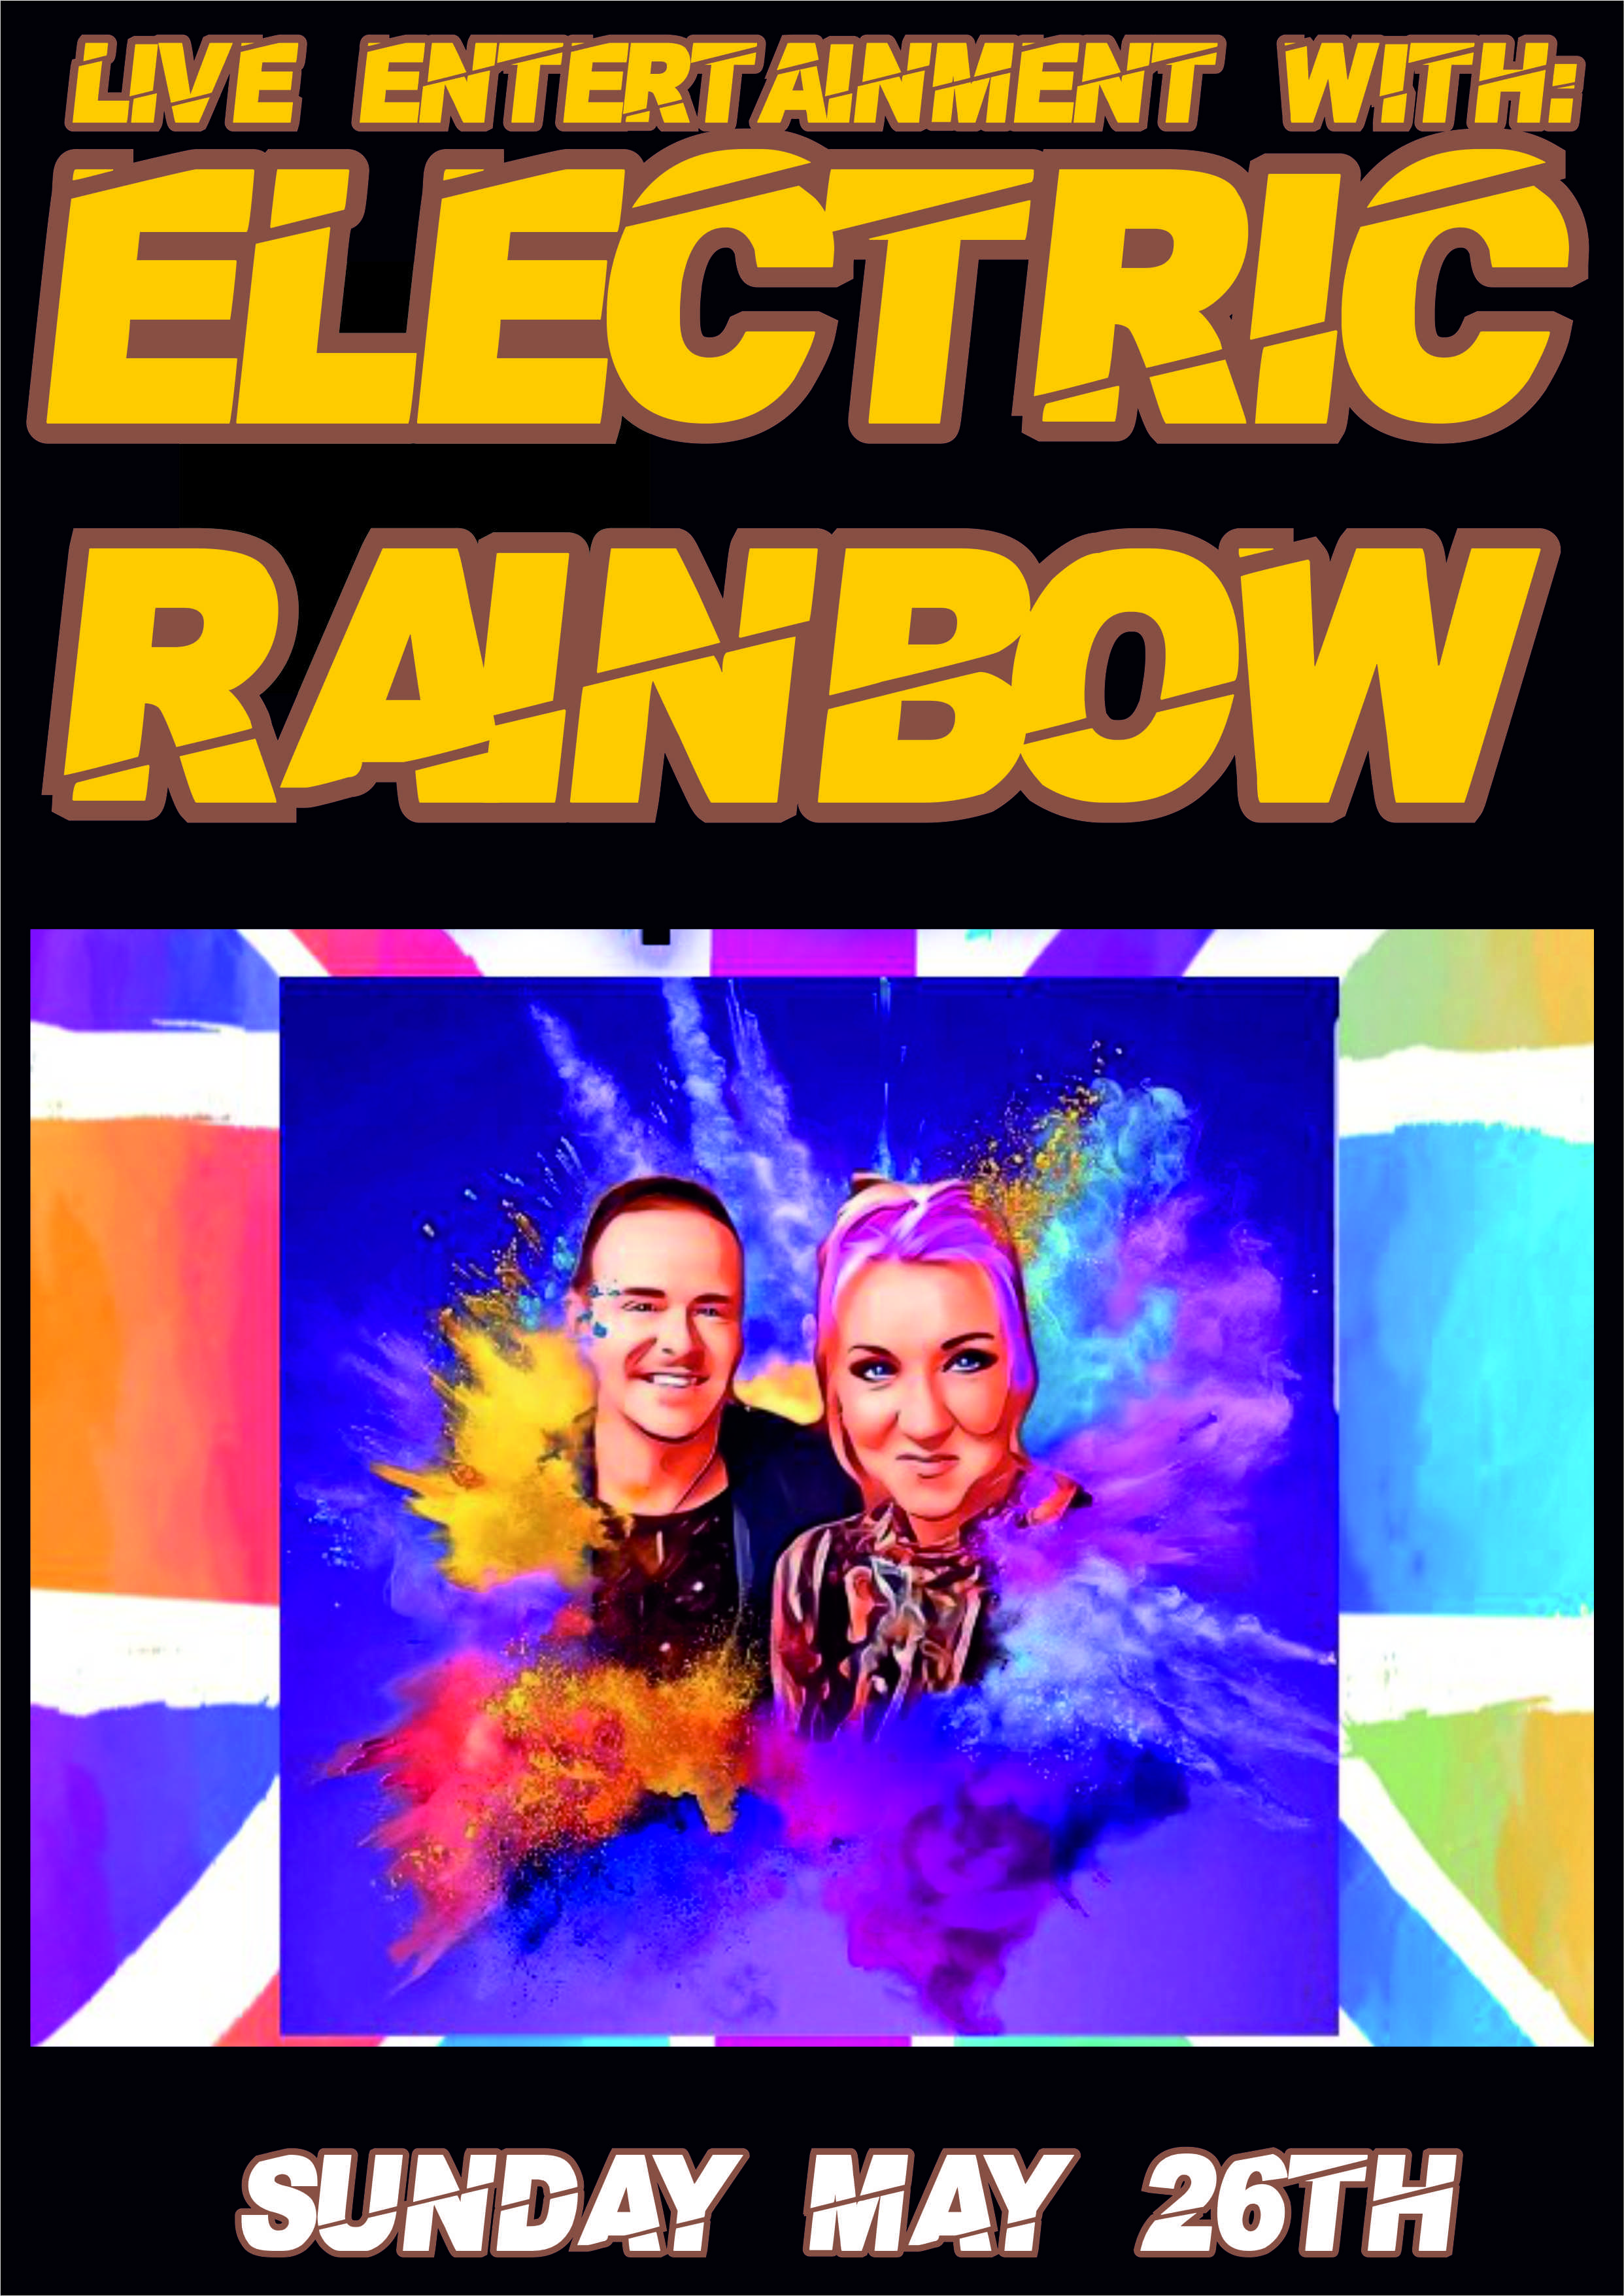 Live Entertainment with Electric Rainbow